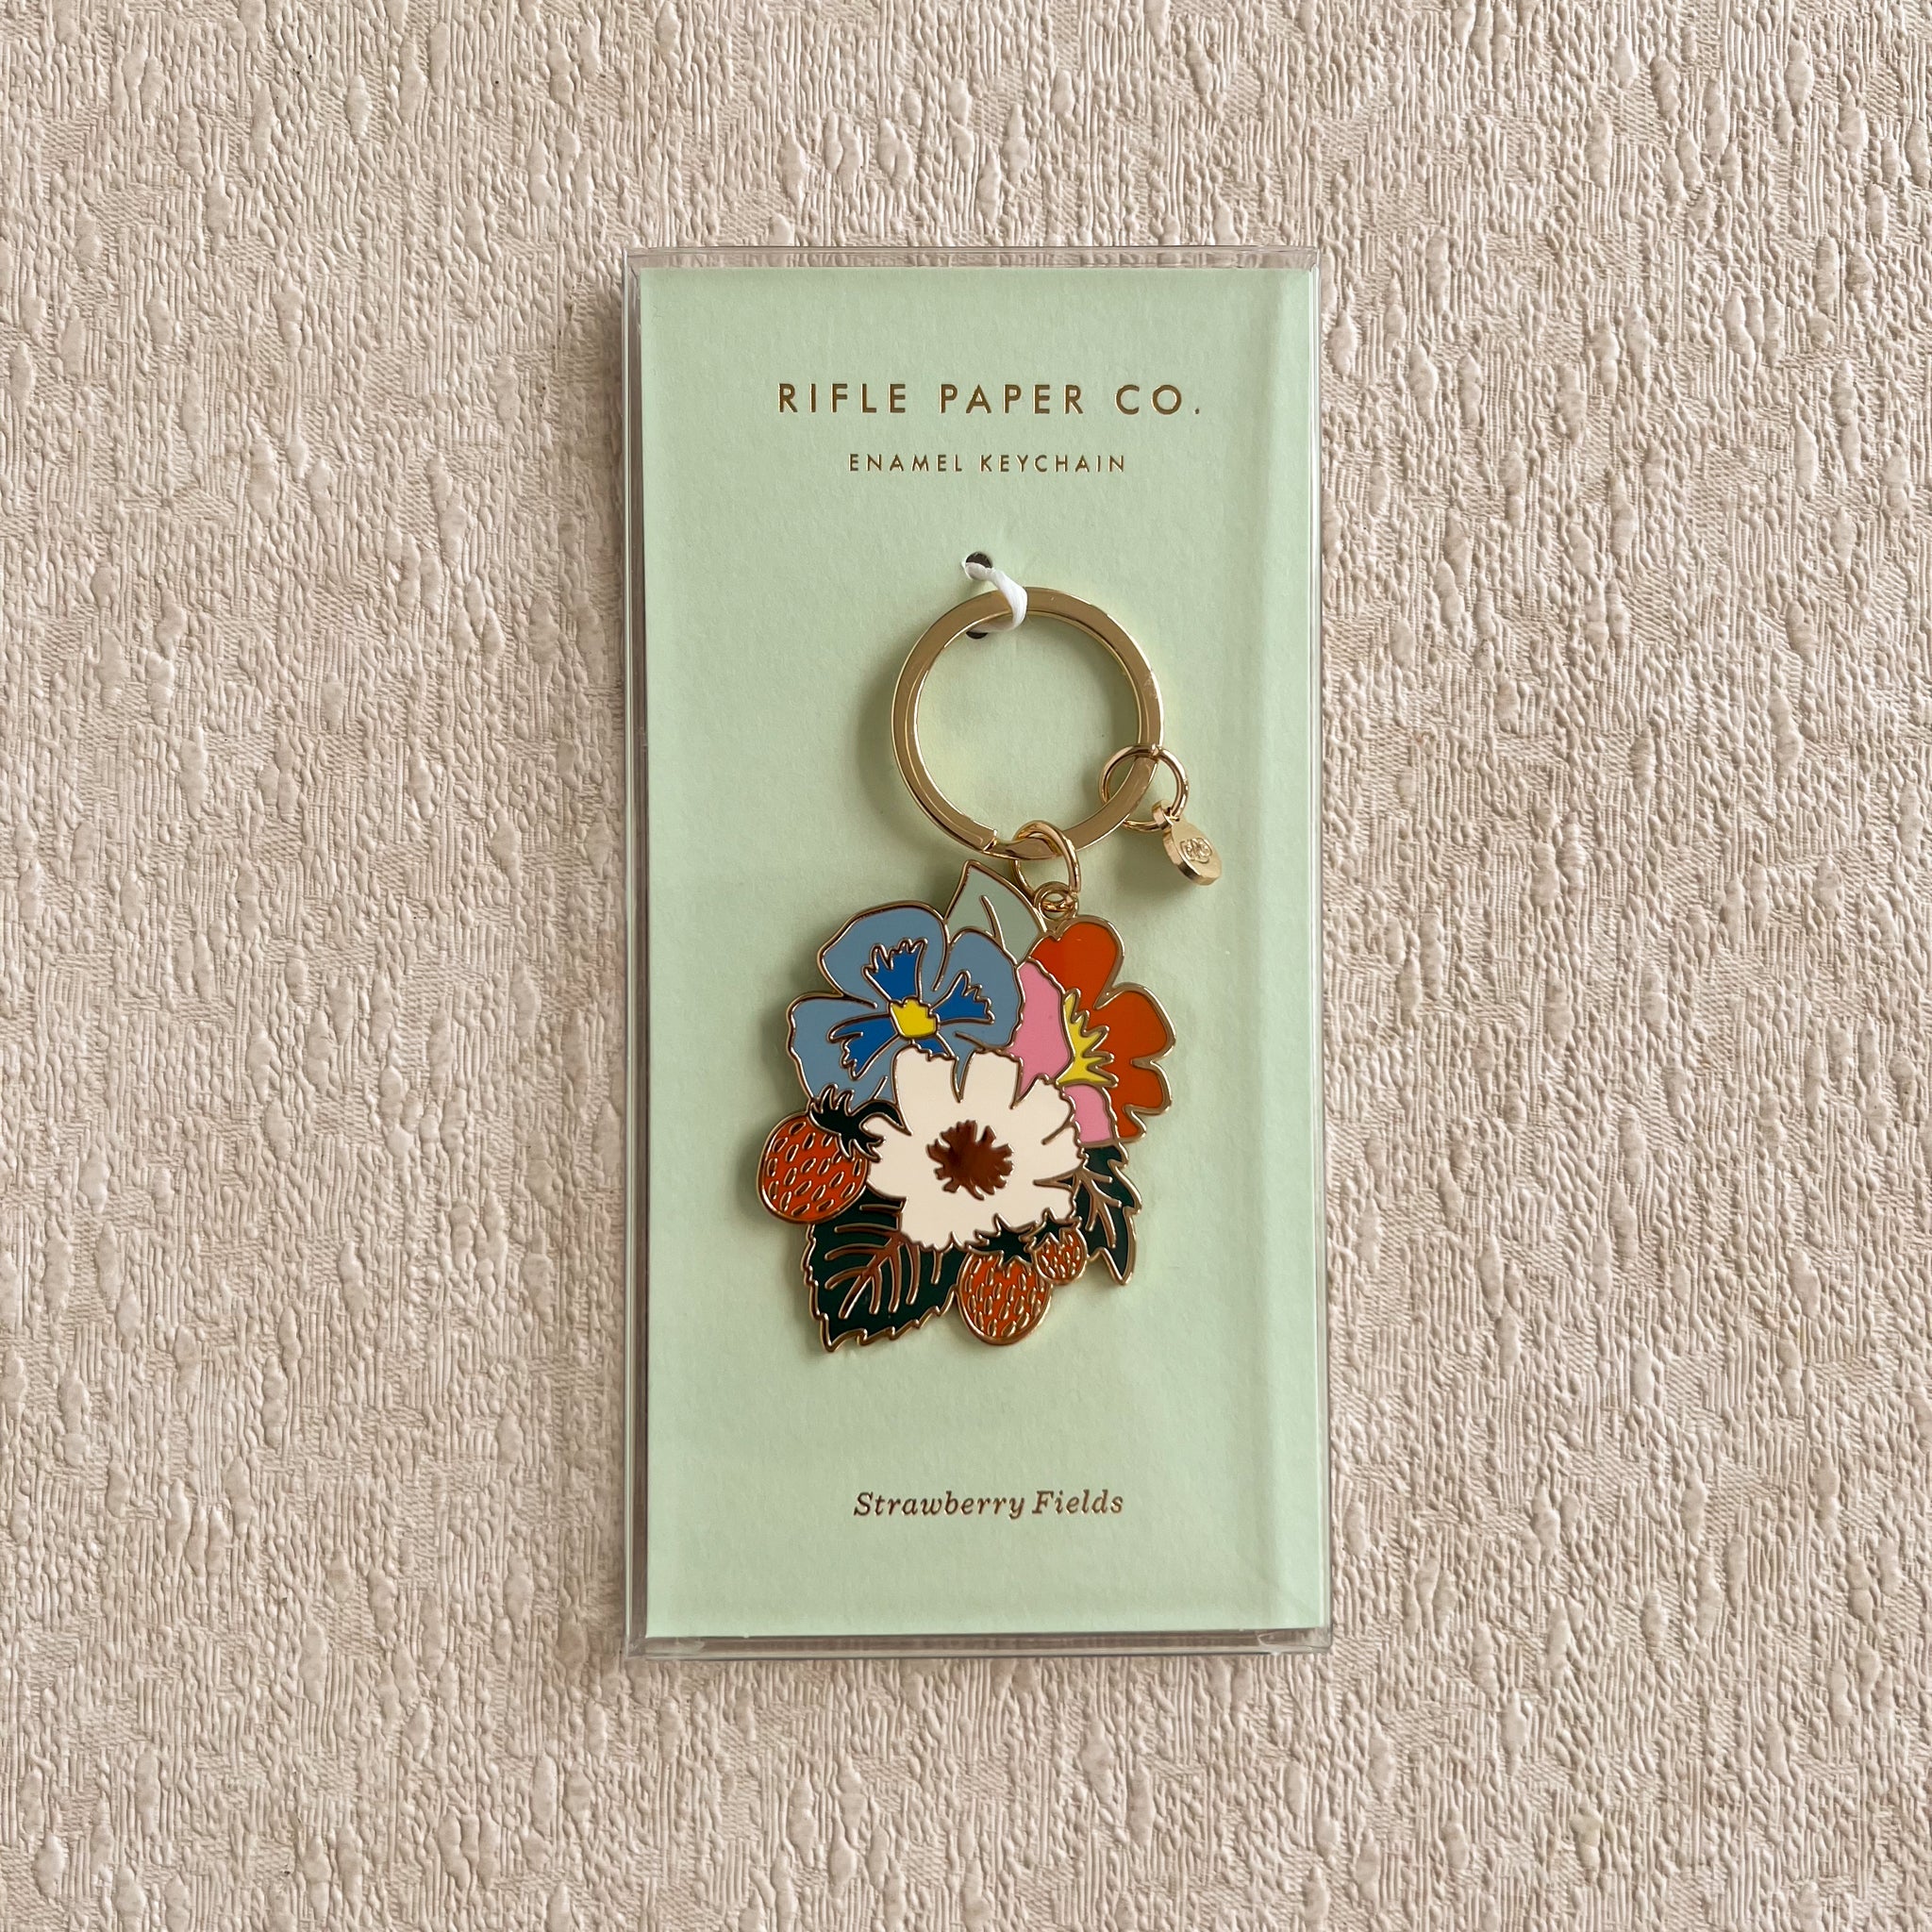 Book Club Keychain by Rifle Paper Co